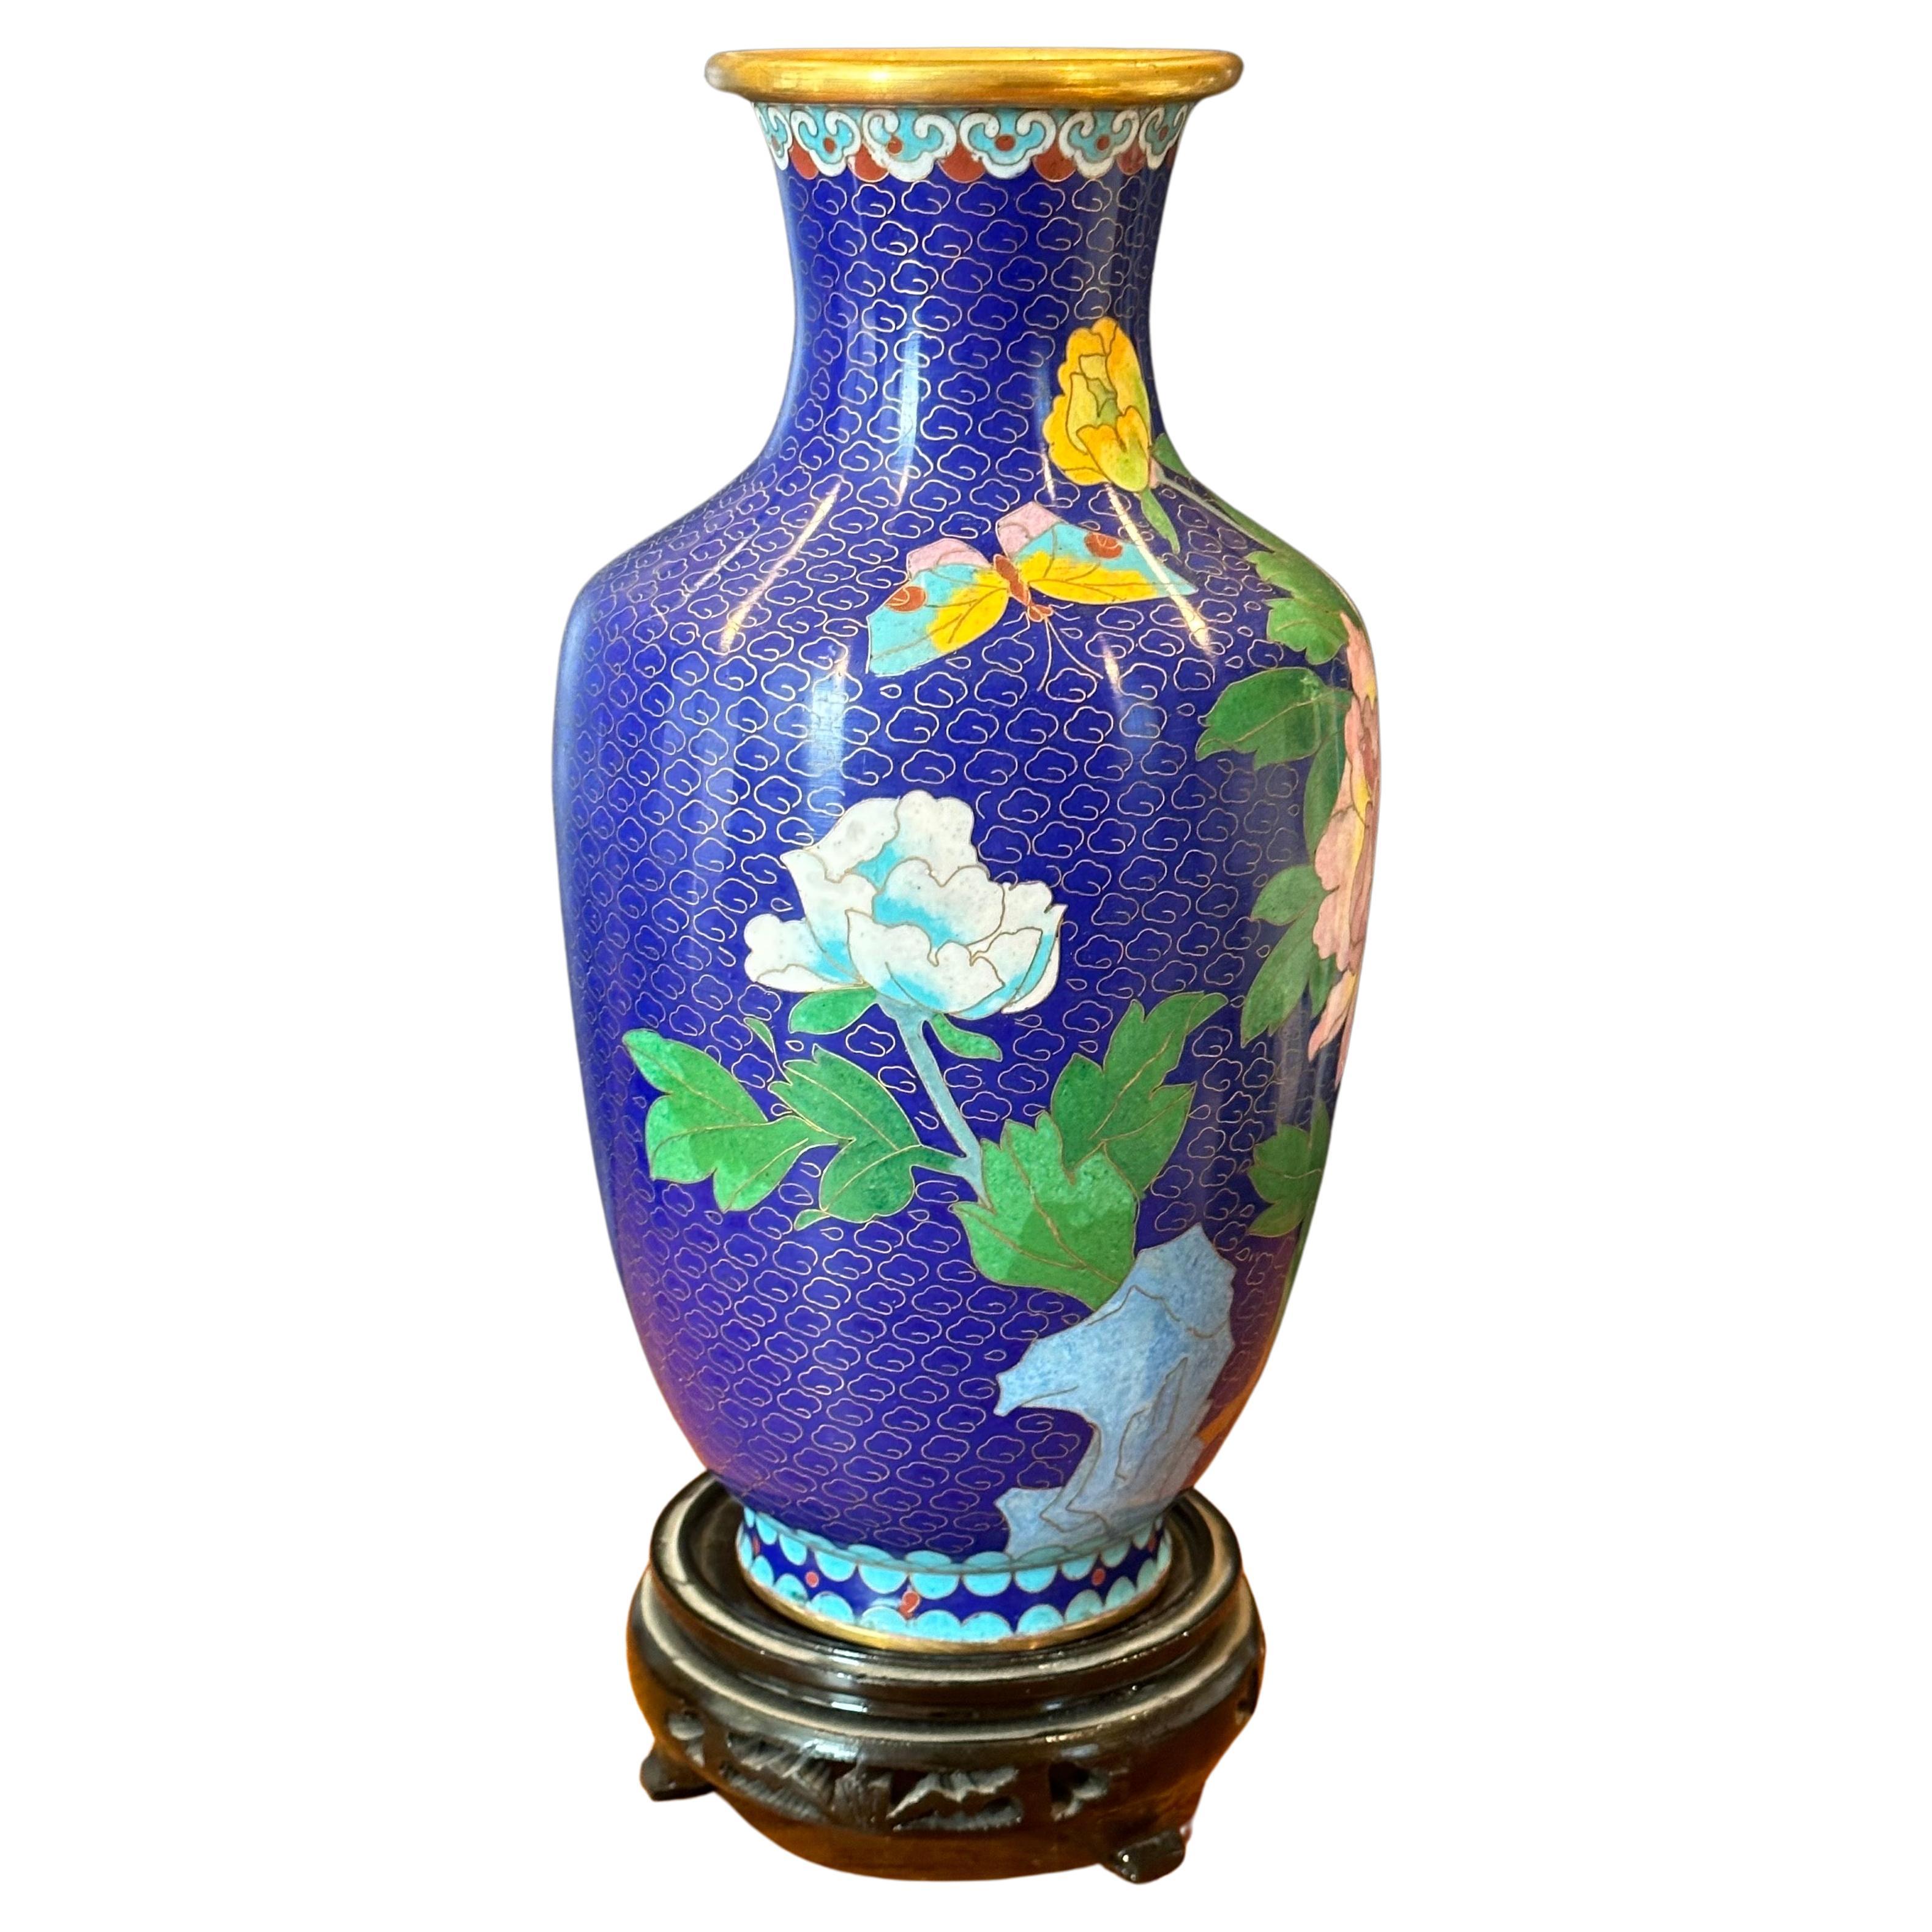 A nice Chinese cloisonne vase on stand with floral motif, circa 1970s. The vase is in very good condition with no dings or dents and measure 5.75